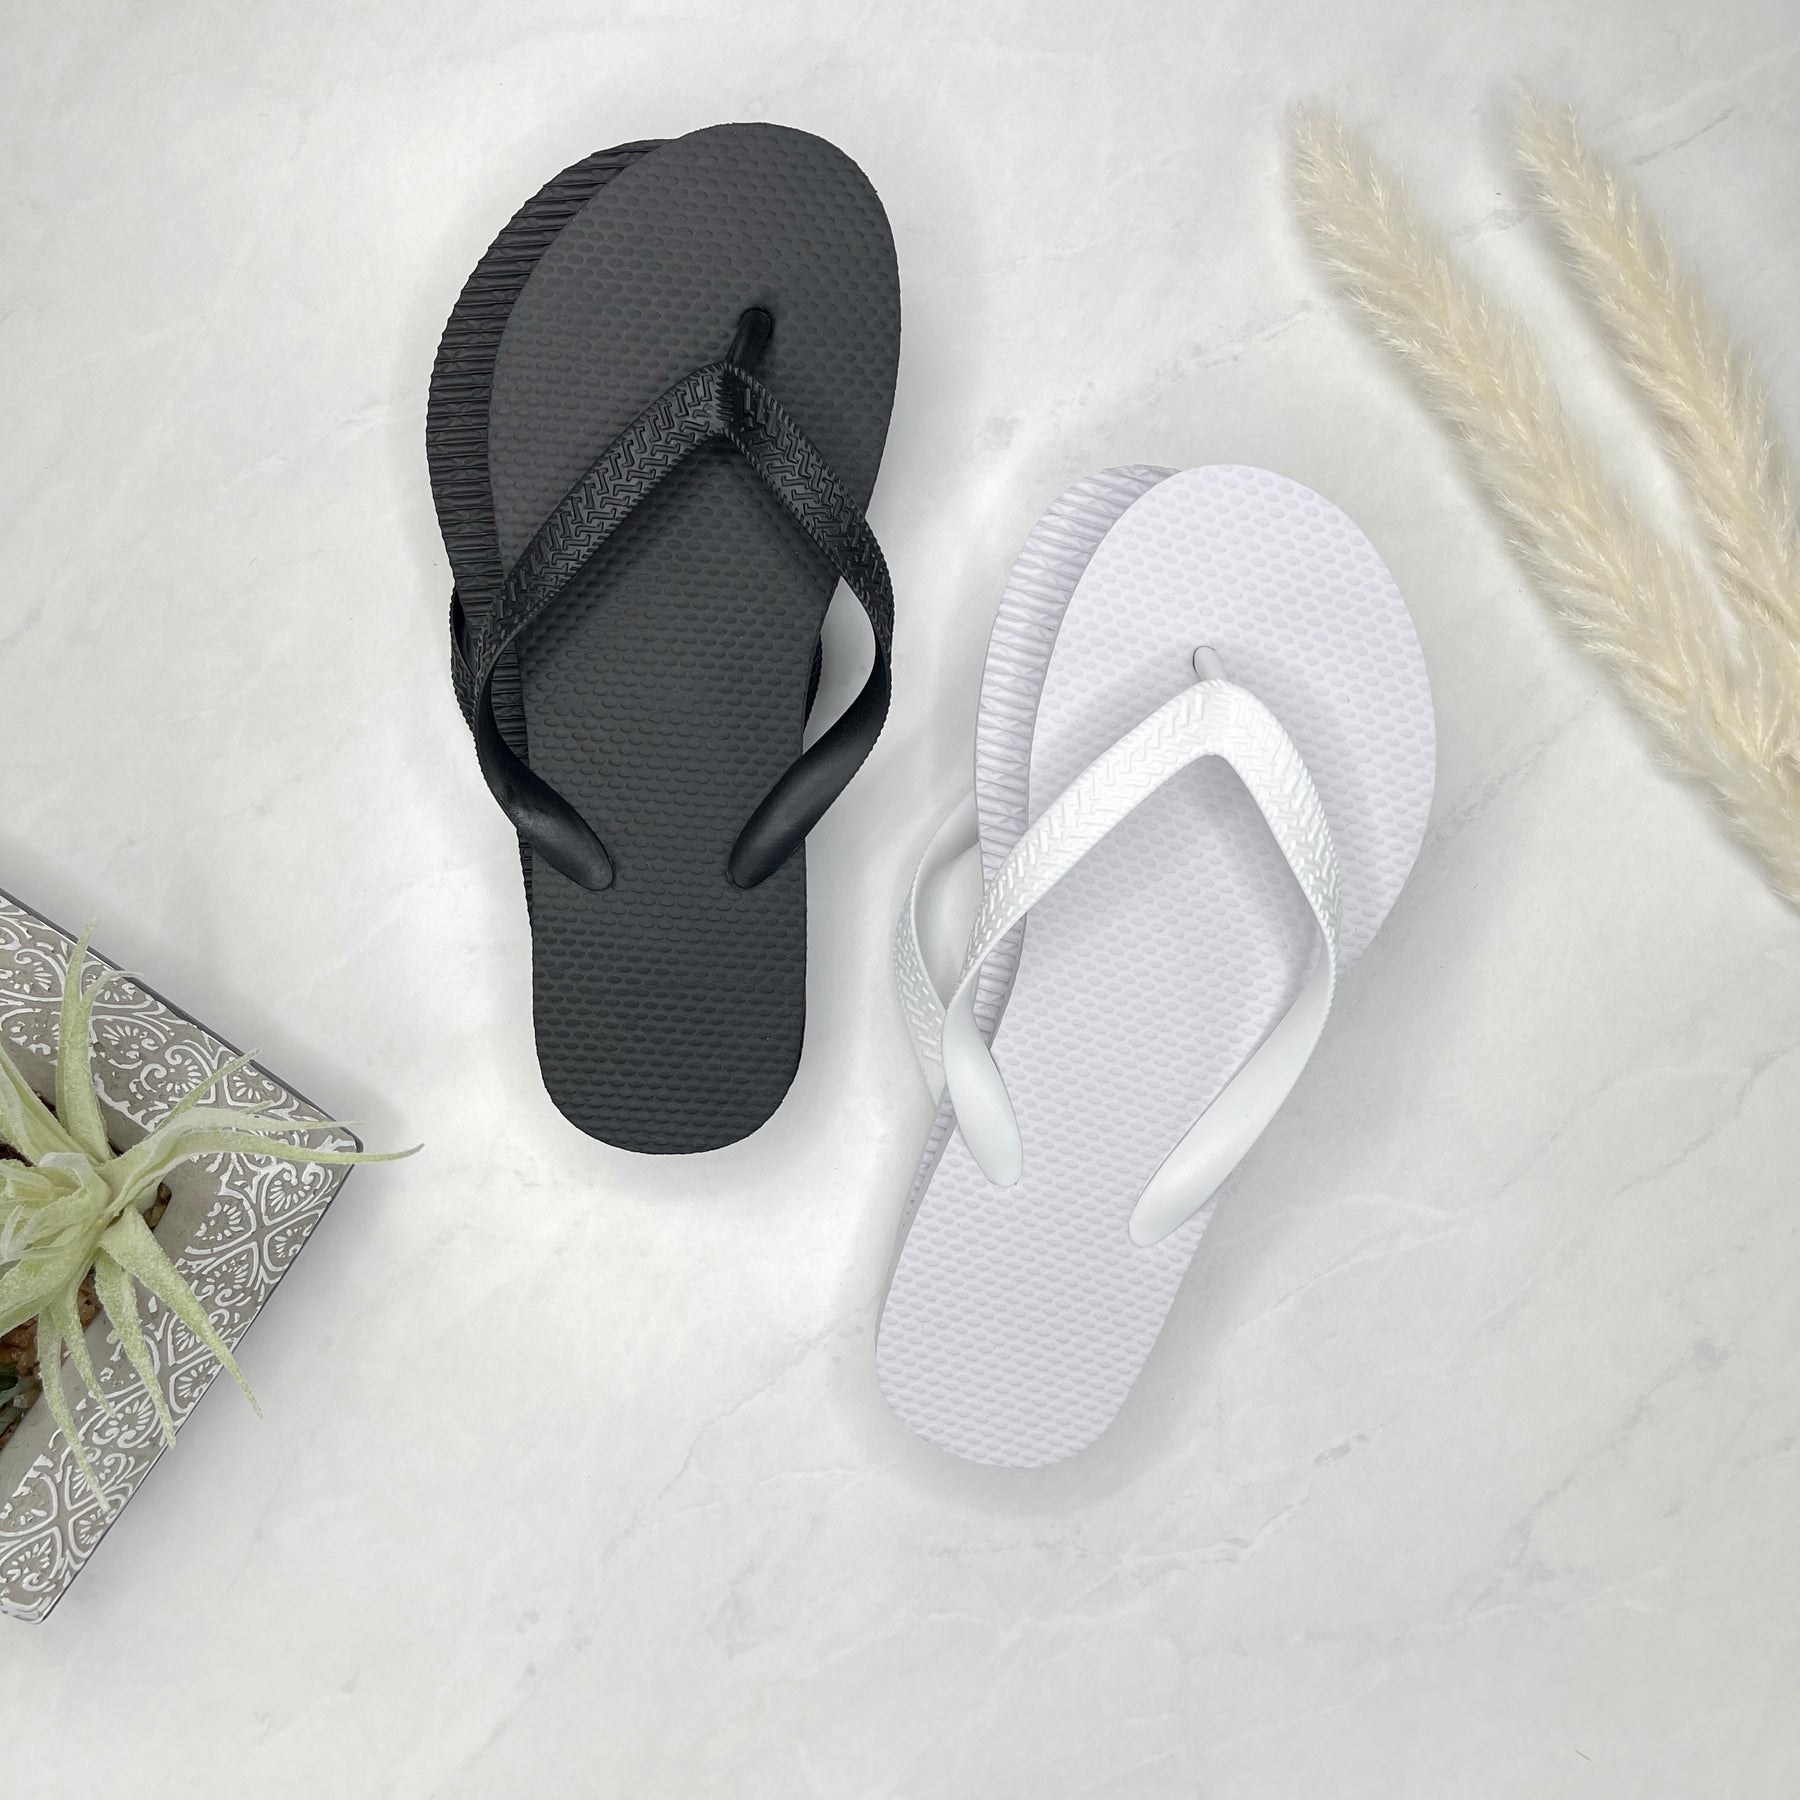 Wedding Flip Flops (Black or White Available) | 6 Pairs